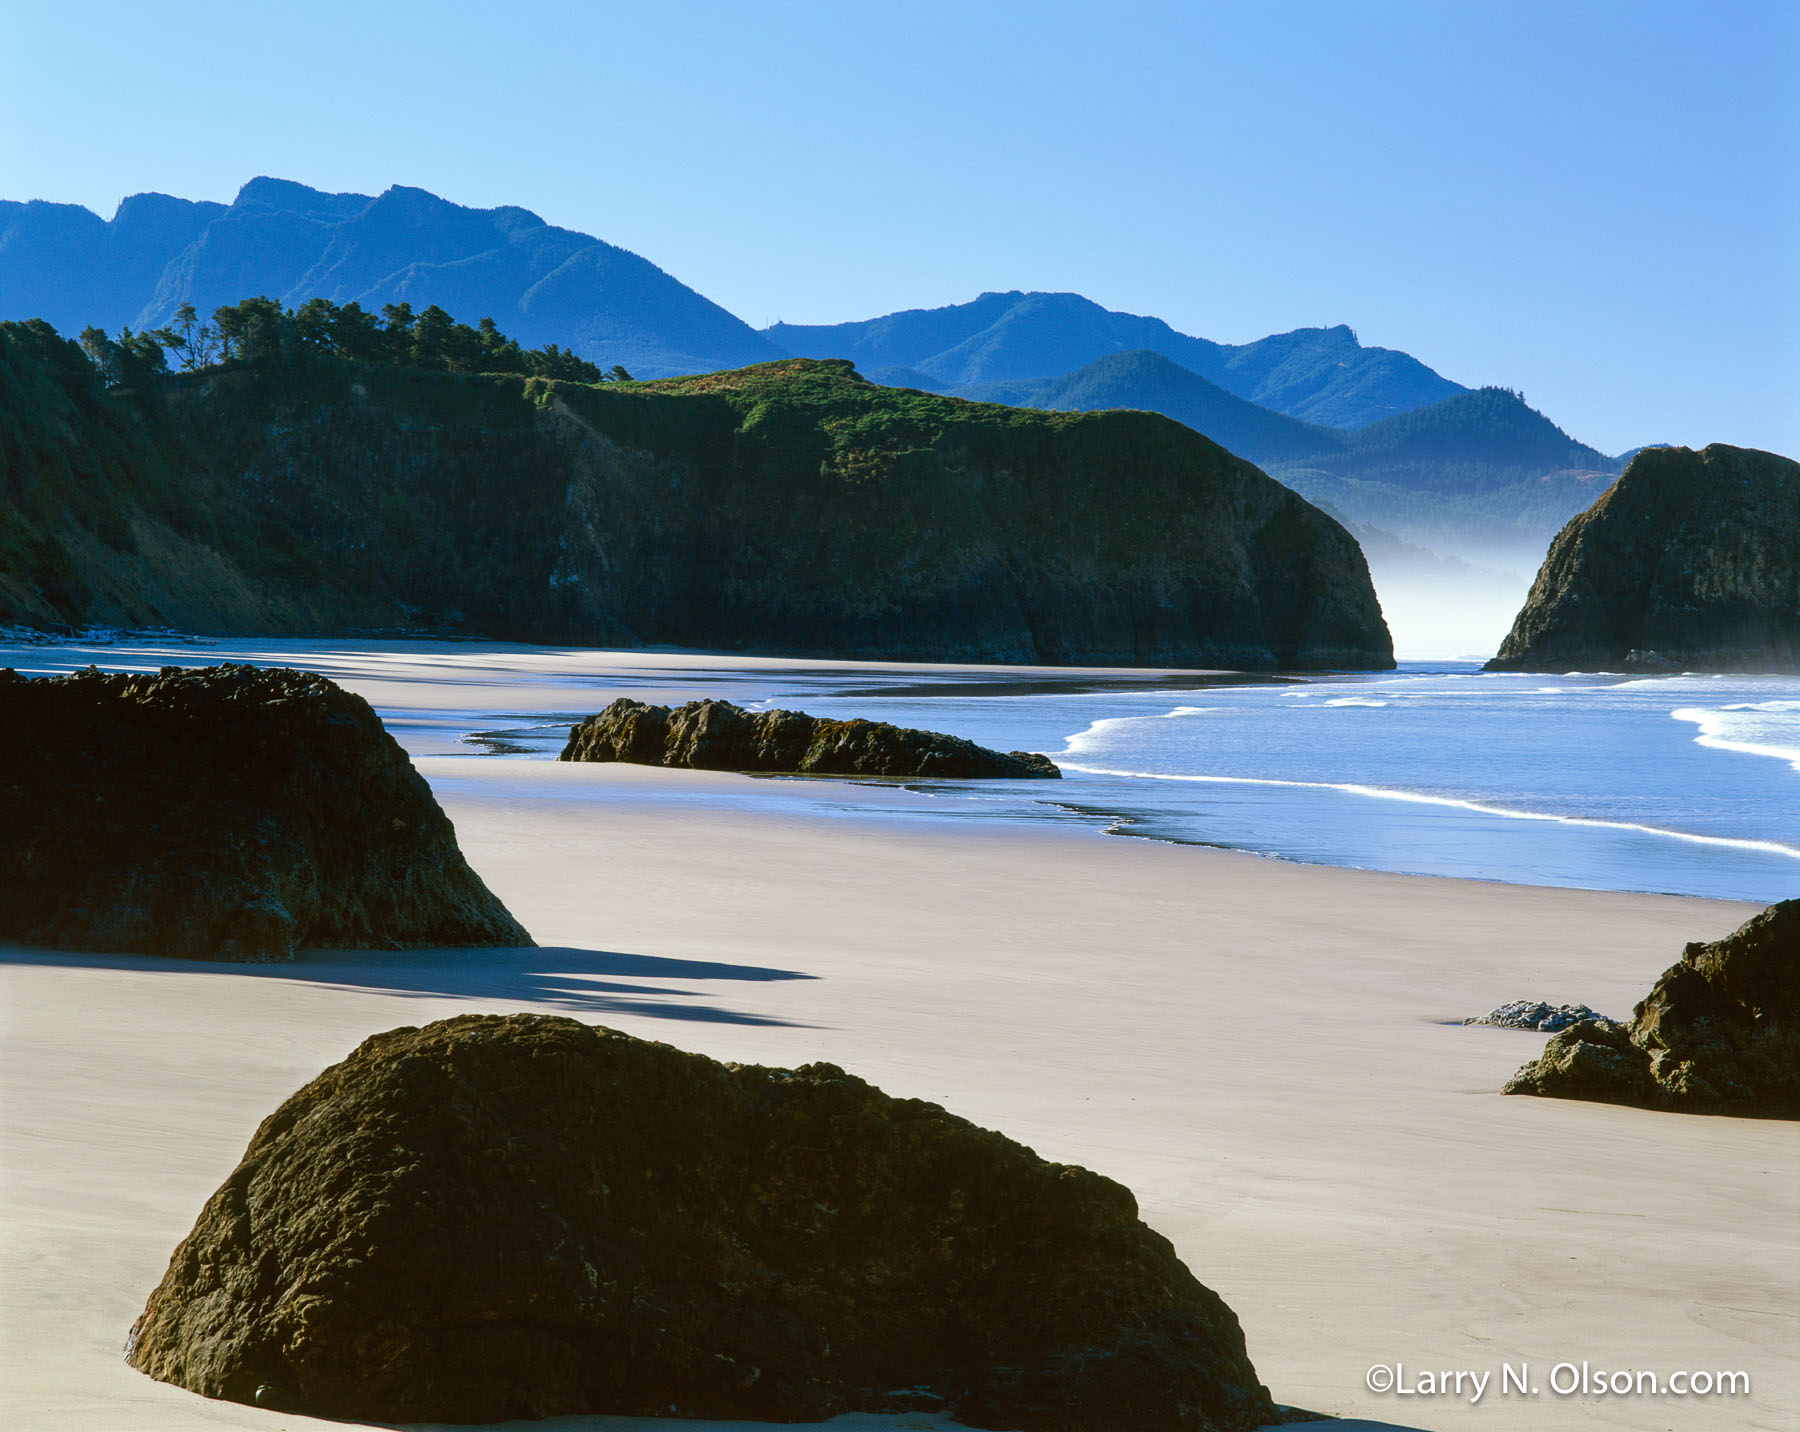 Low Tide#1, Ecola State Park, Oregon | Big black rocks are silhouetted against an empty Oregon beach at low tide.